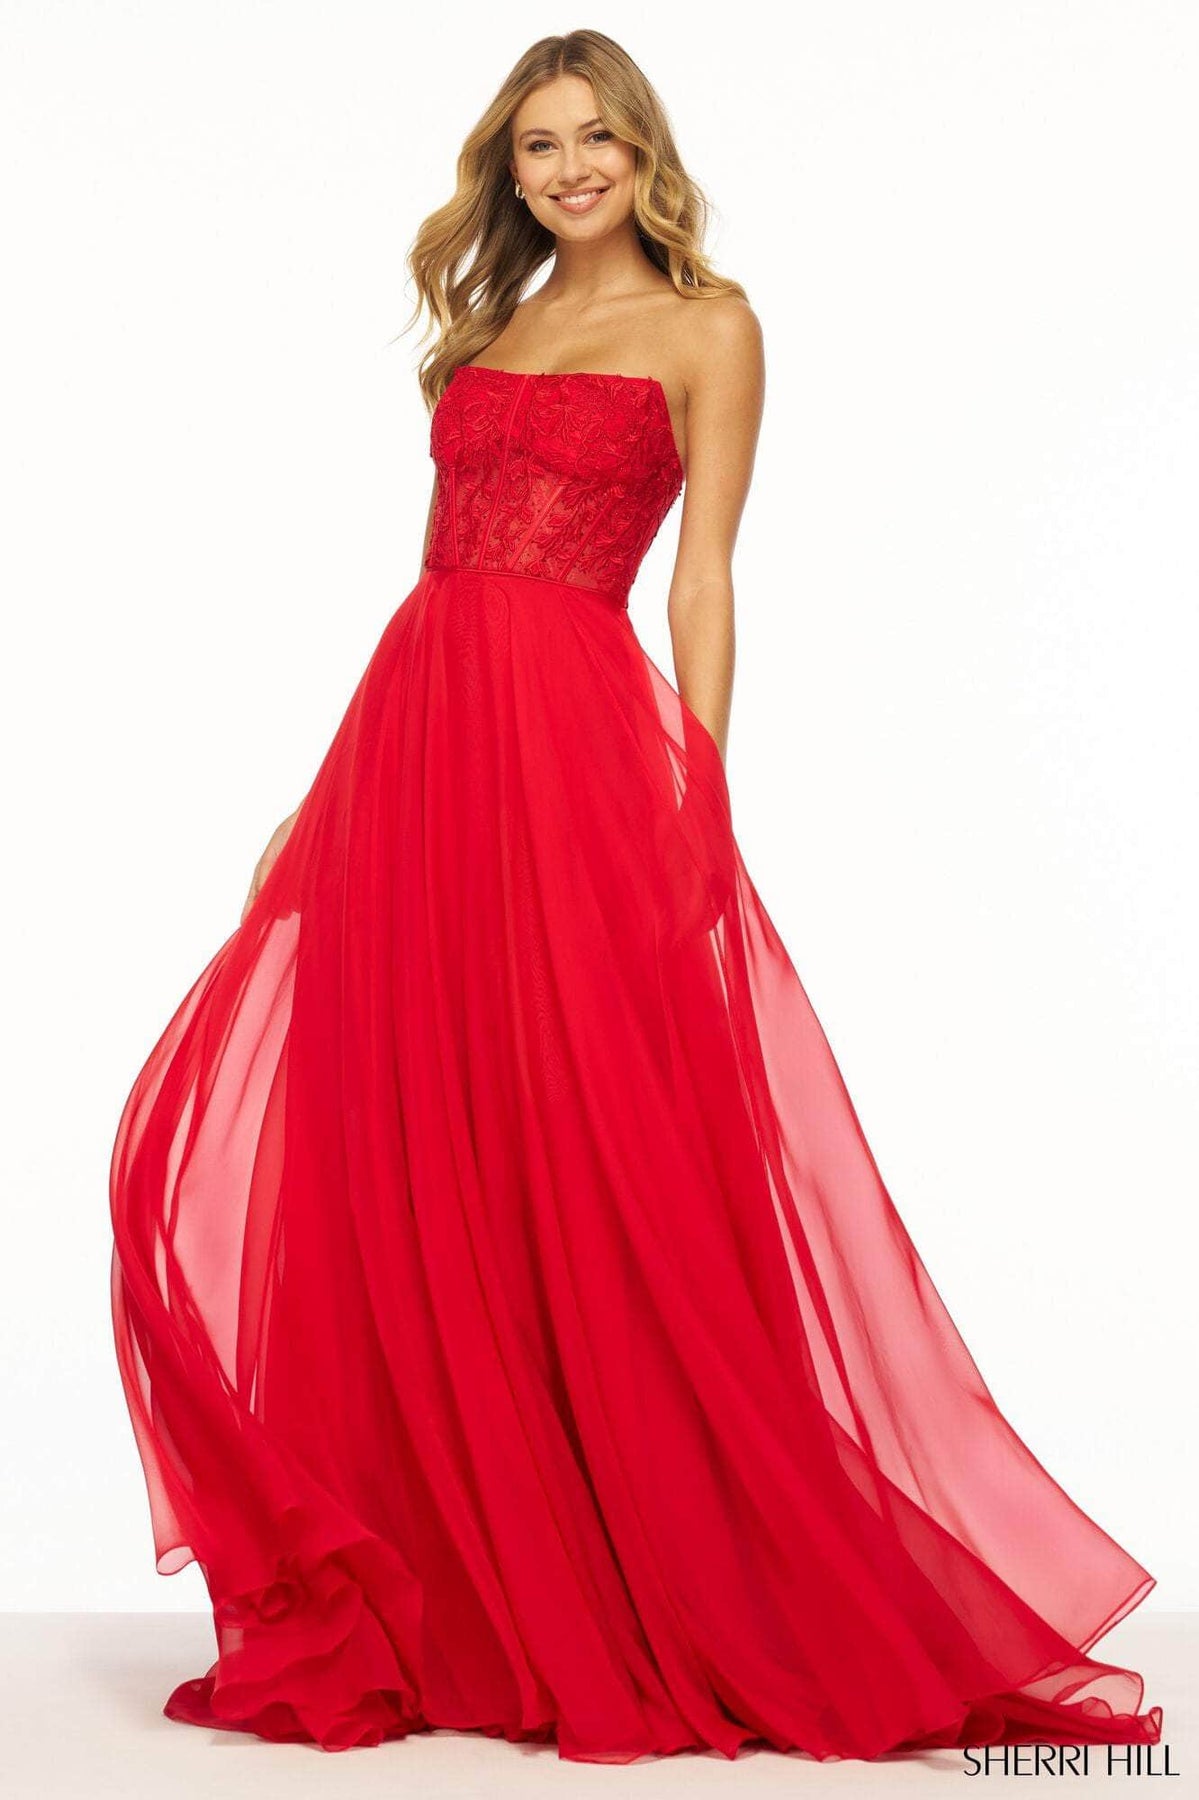 SHERRI HILL - 56042 - Strapless Ballgown with Leaf Lace Corset